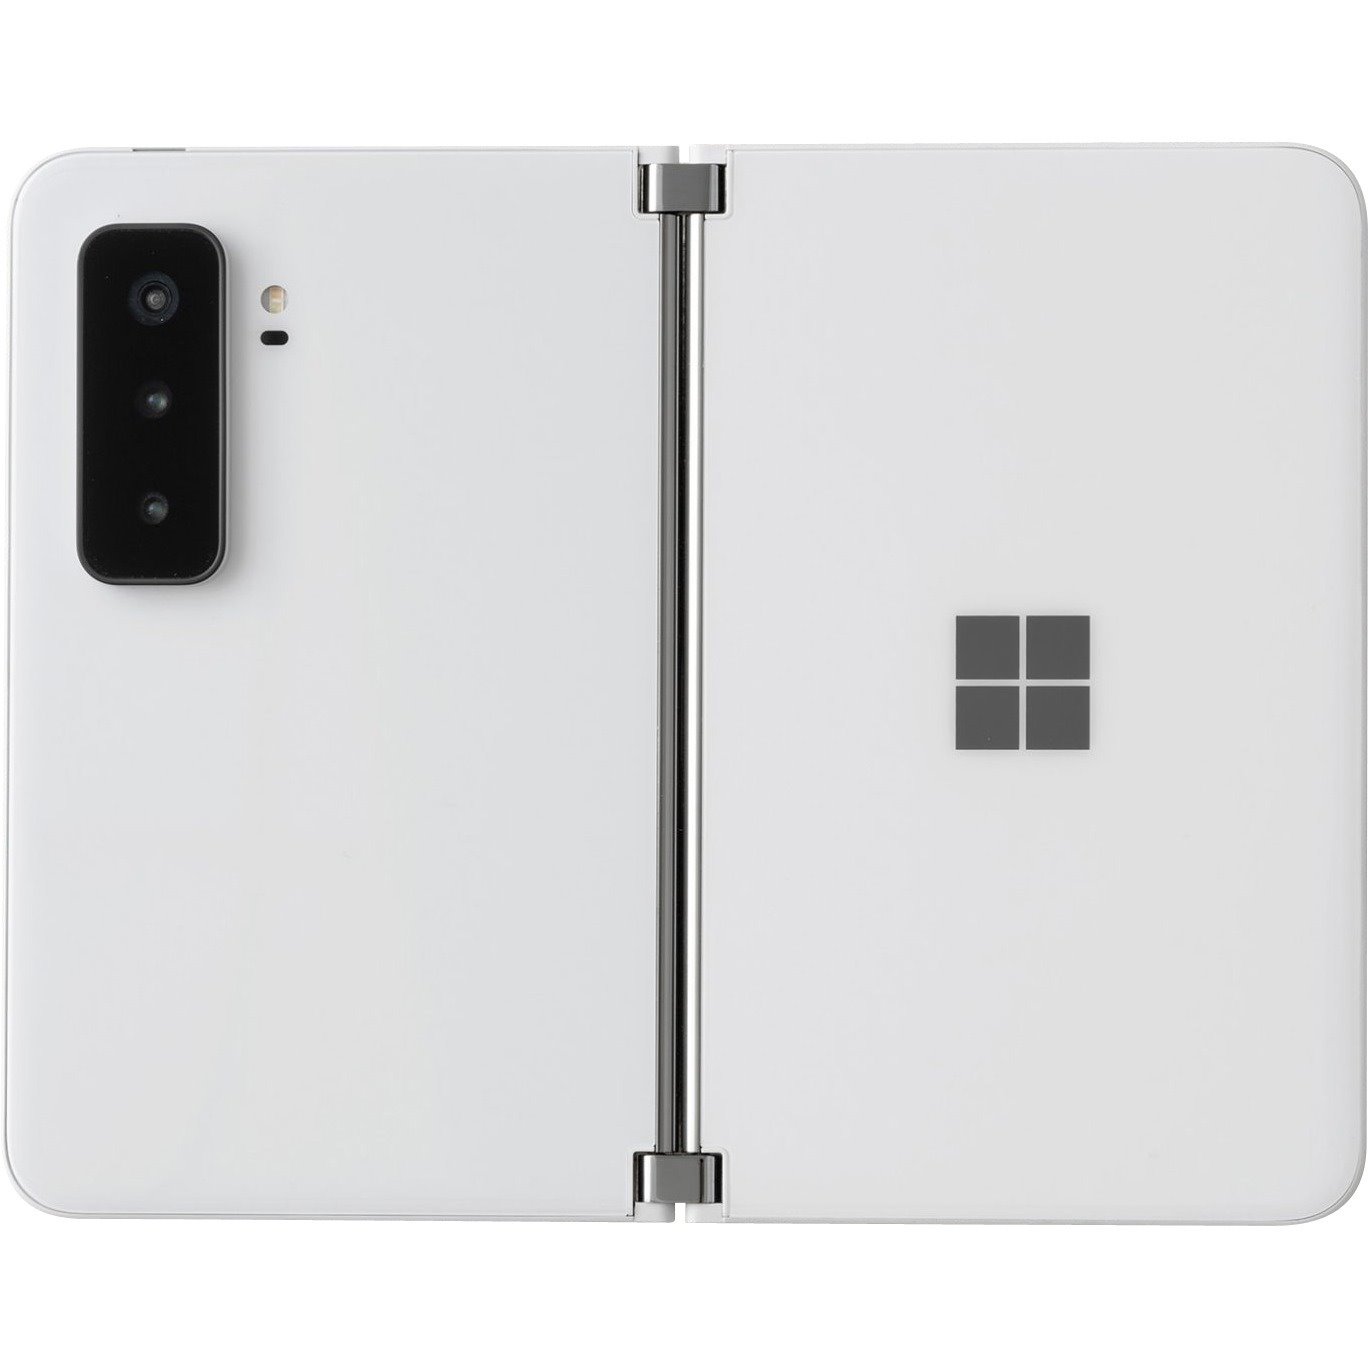 Microsoft Surface Duo 2 256 GB Smartphone - 21.1 cm (8.3") Yes AMOLED 2688 x 1892 - Octa-core (Kryo 680Single-core (1 Core) 2.84 GHz + Kryo 680 Triple-core (3 Core) 2.42 GHz + Kryo 680 Quad-core (4 Core) 1.80 GHz) - 8 GB RAM - Android 11 - 5G - Glacier